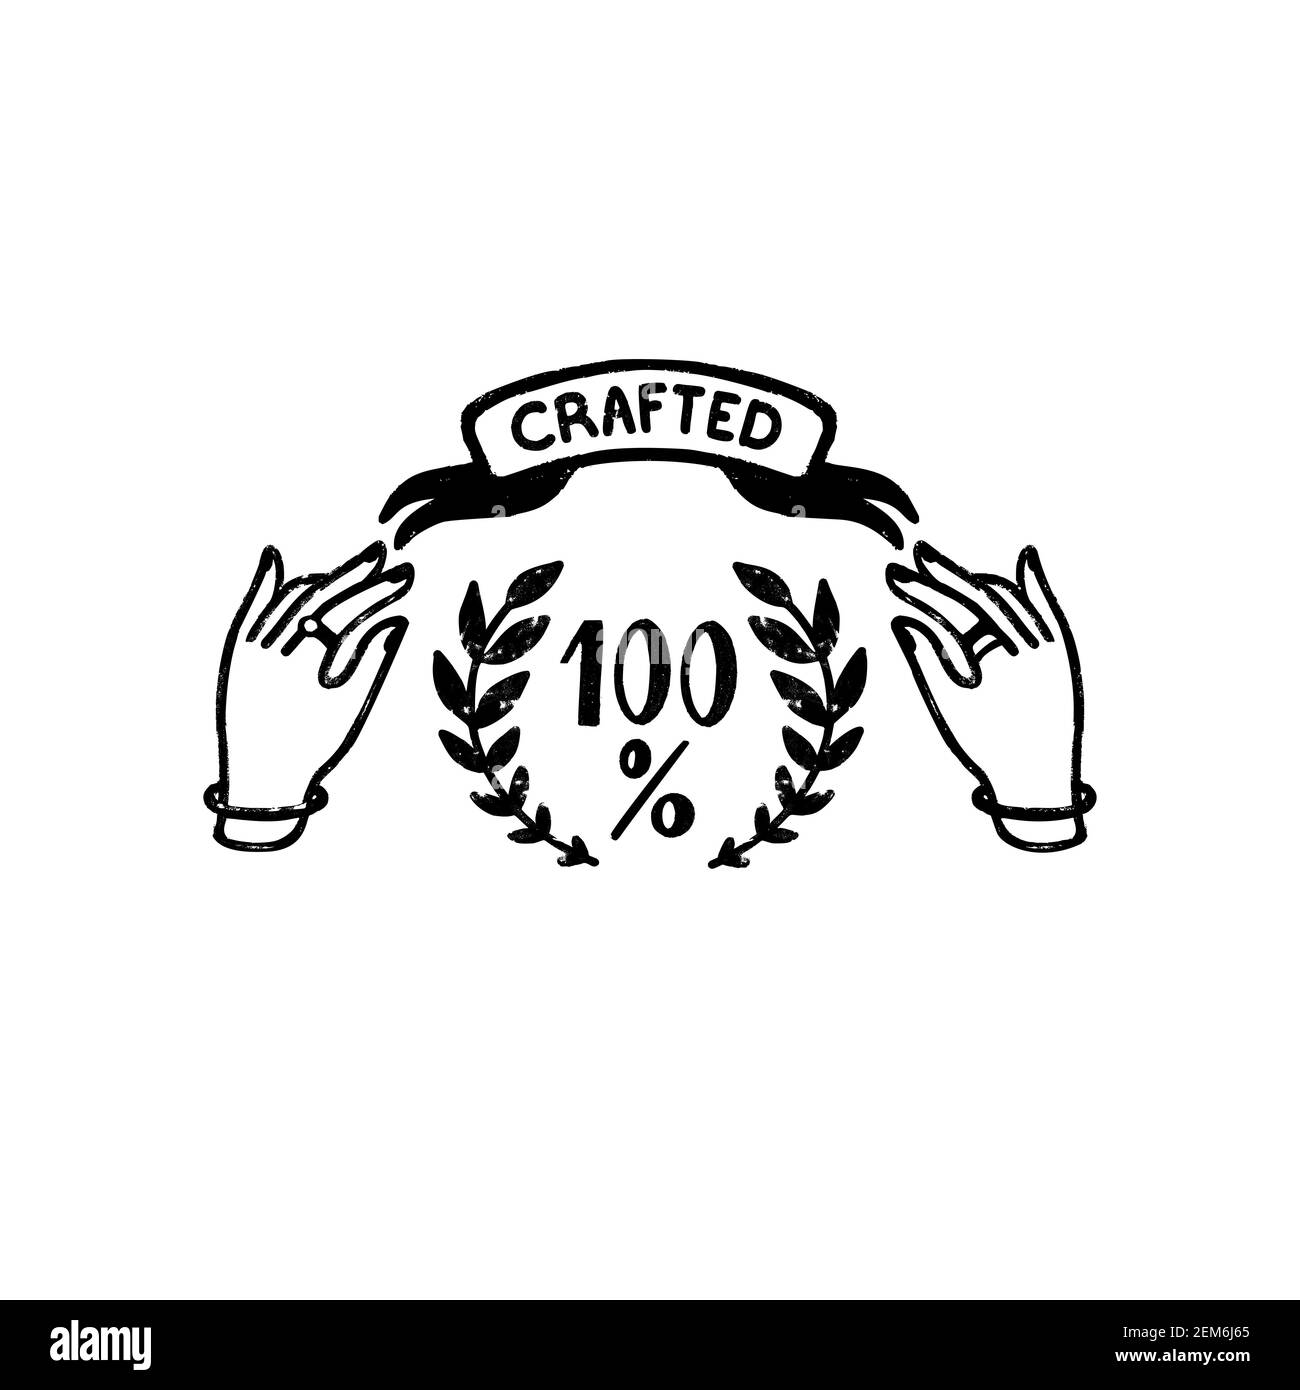 100 percent Crafted vector logo - a vintage handmade badge with hands ...